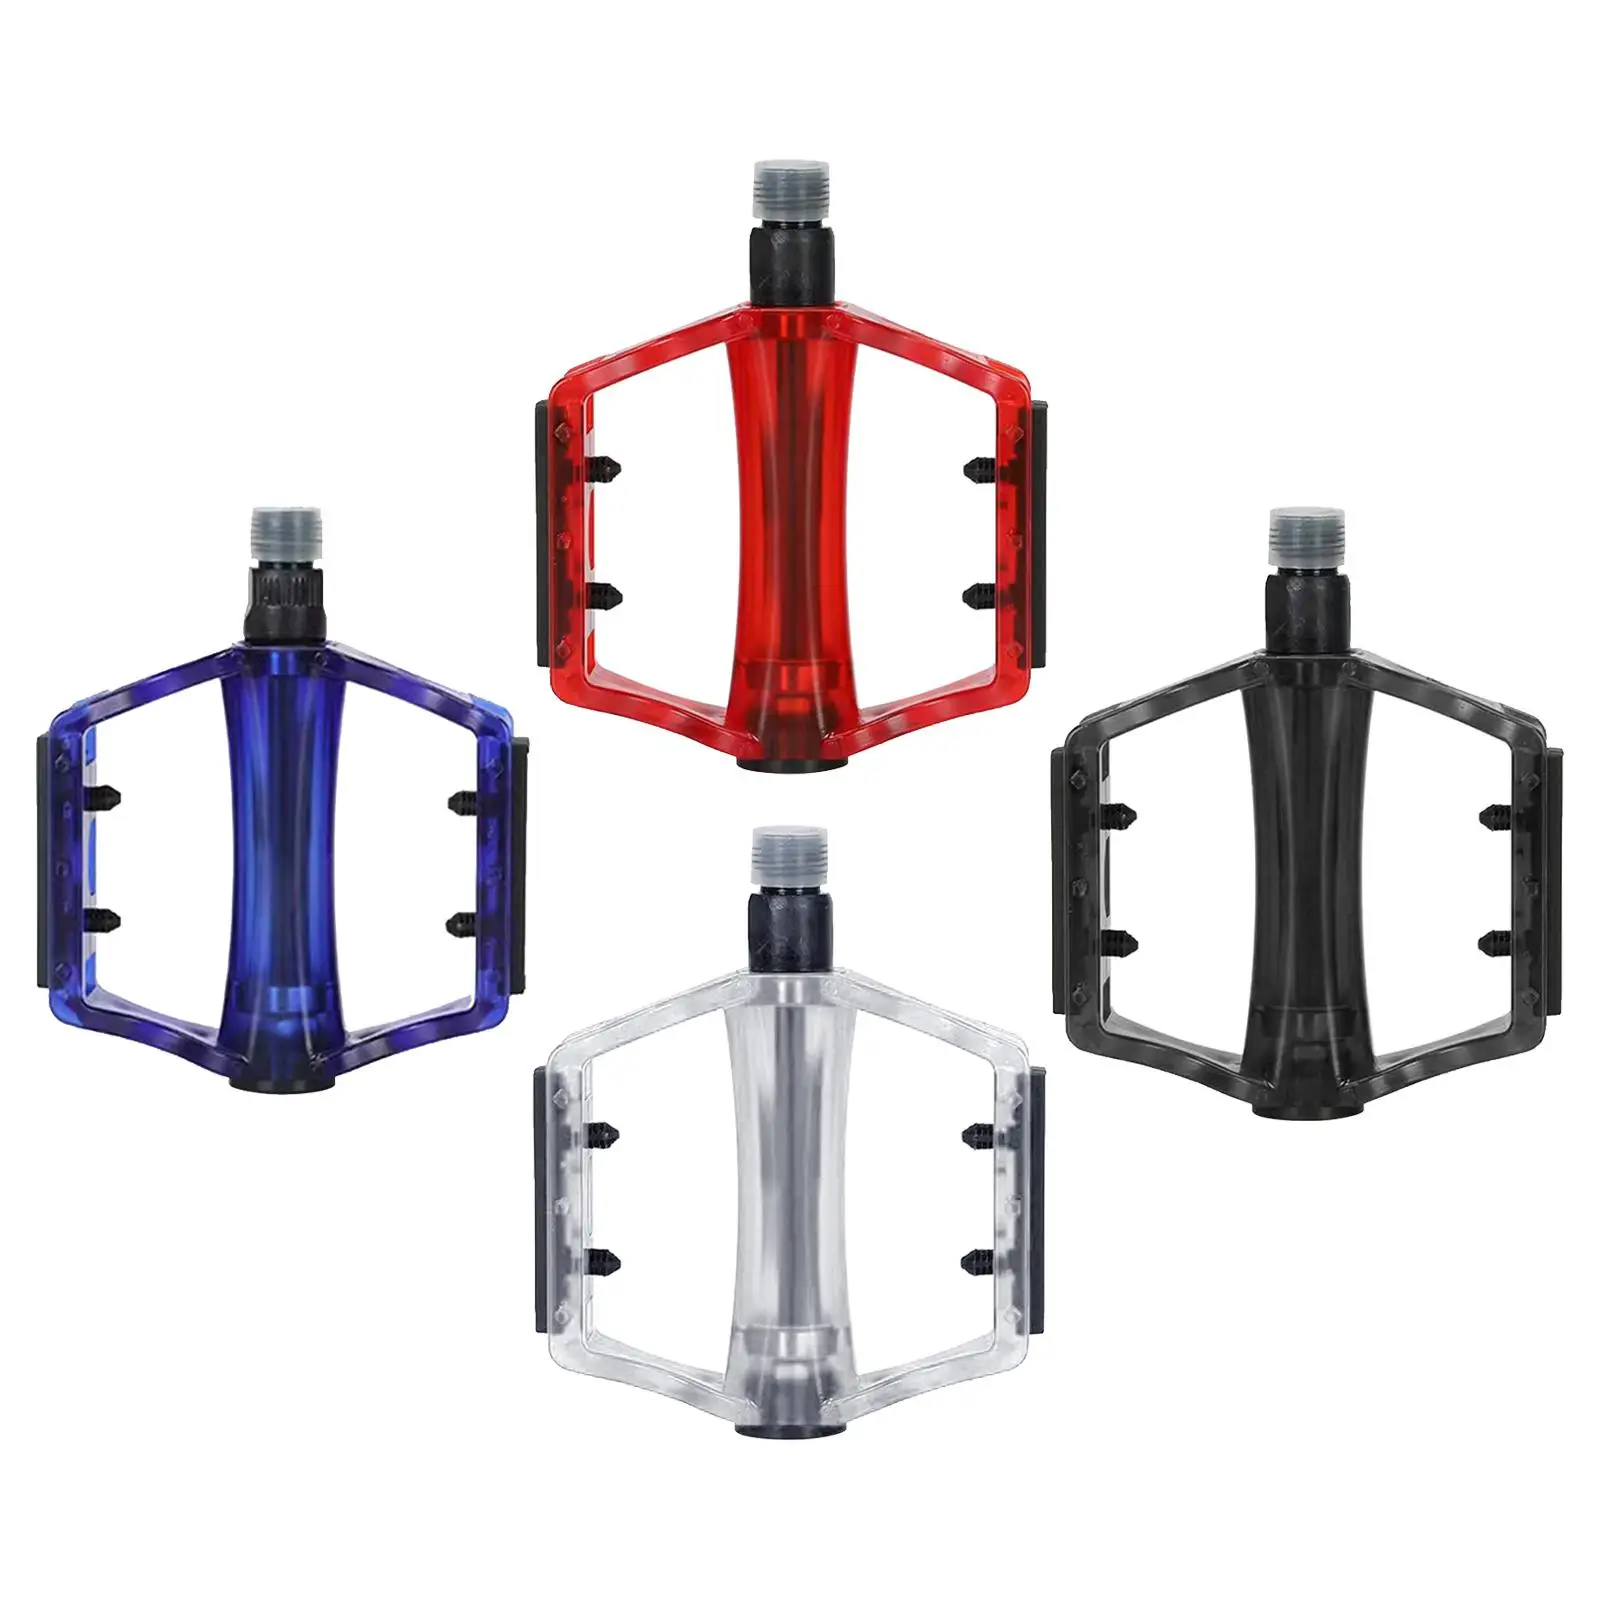 2x Bike Pedals Bicycle Pedals Universal Durable Lightweight Accessories for Road Bike Mountain Bike Adult Bikes Supplies